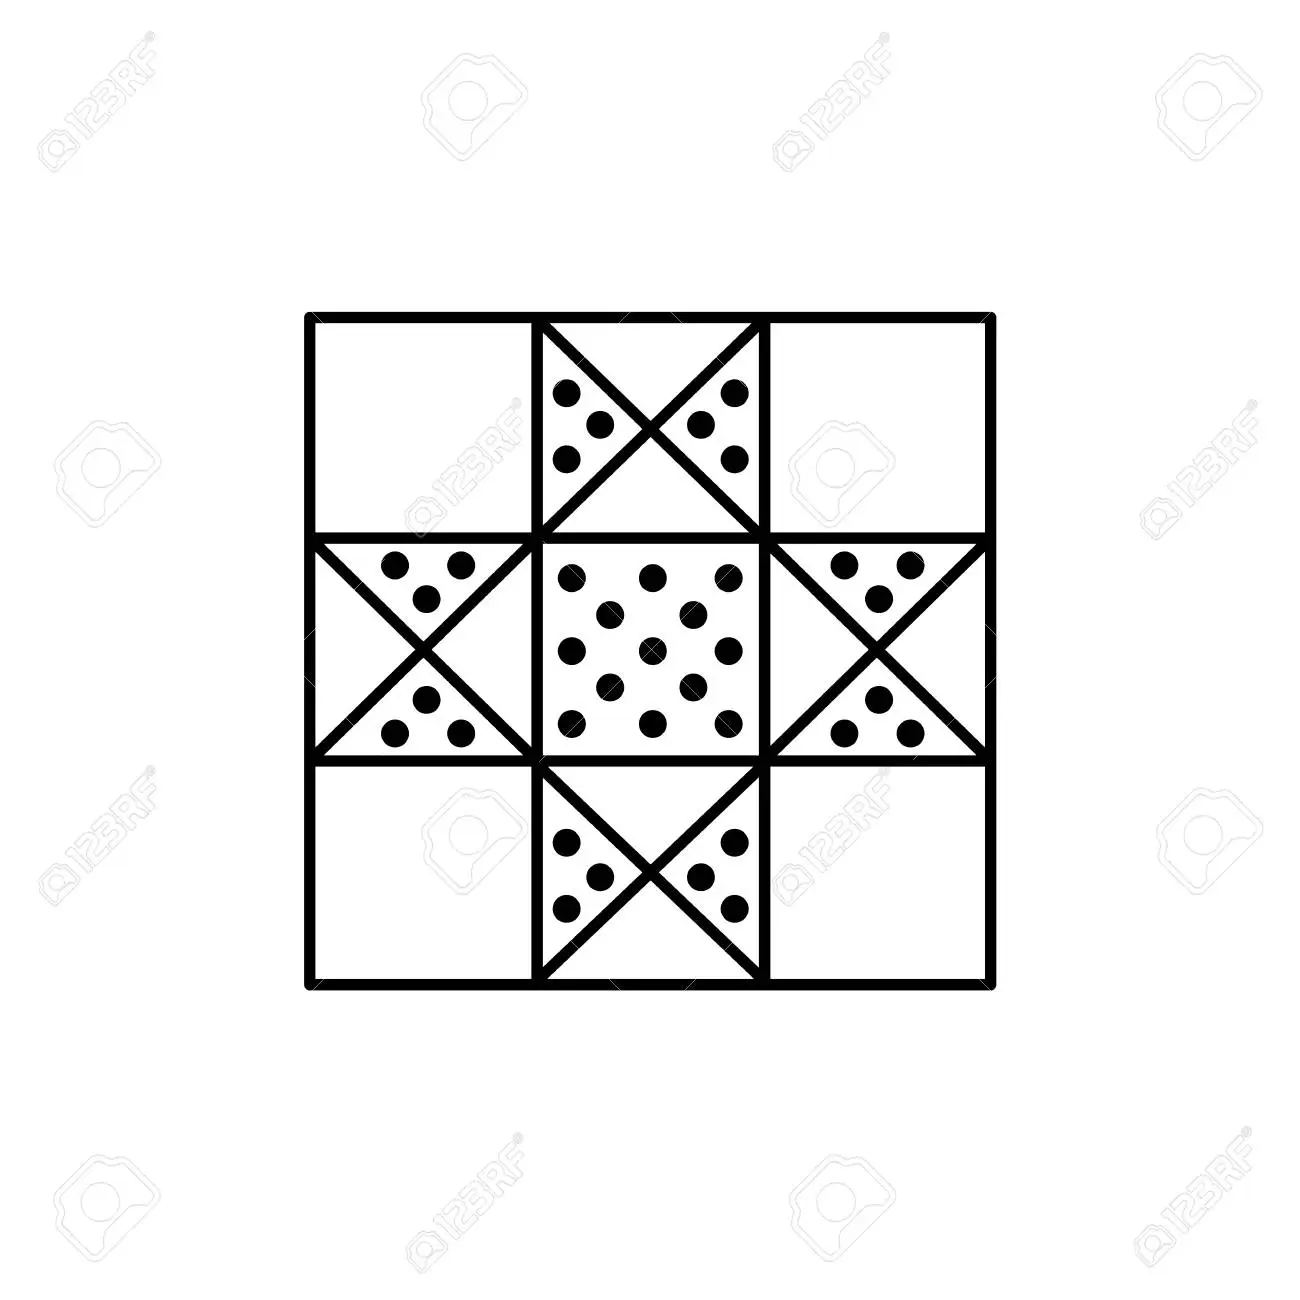 109155750-black-white-vector-illustration-of-lone-star-quilt-pattern-line-icon-of-quilting-patchwork-geometric